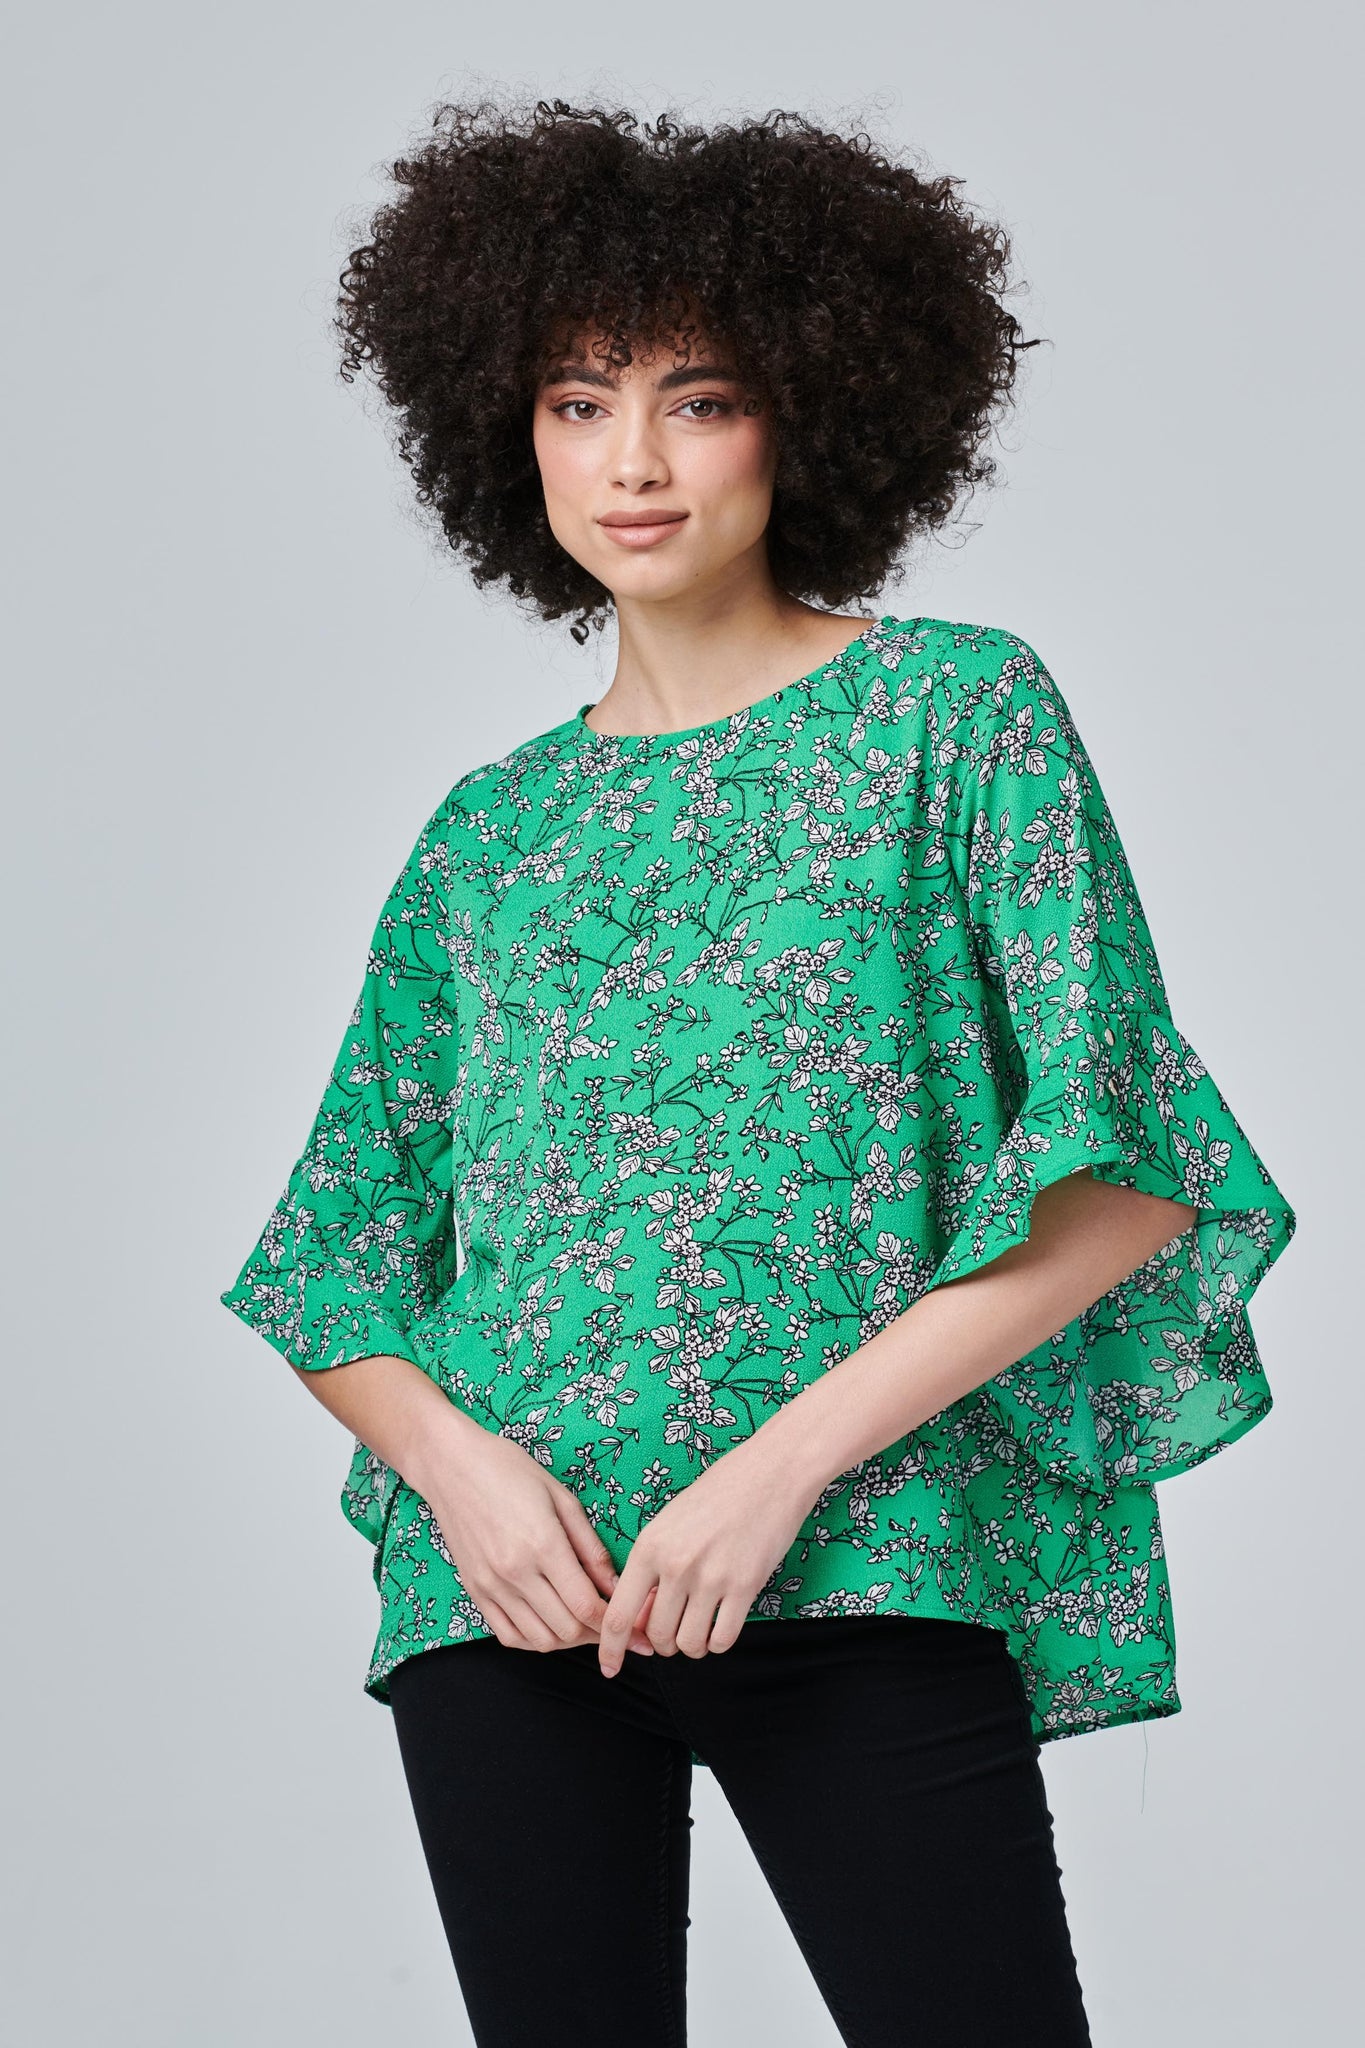 Green | Floral Flute Sleeve Top : Model is 5'8"/172 cm and wears UK8/EU36/US4/AUS8